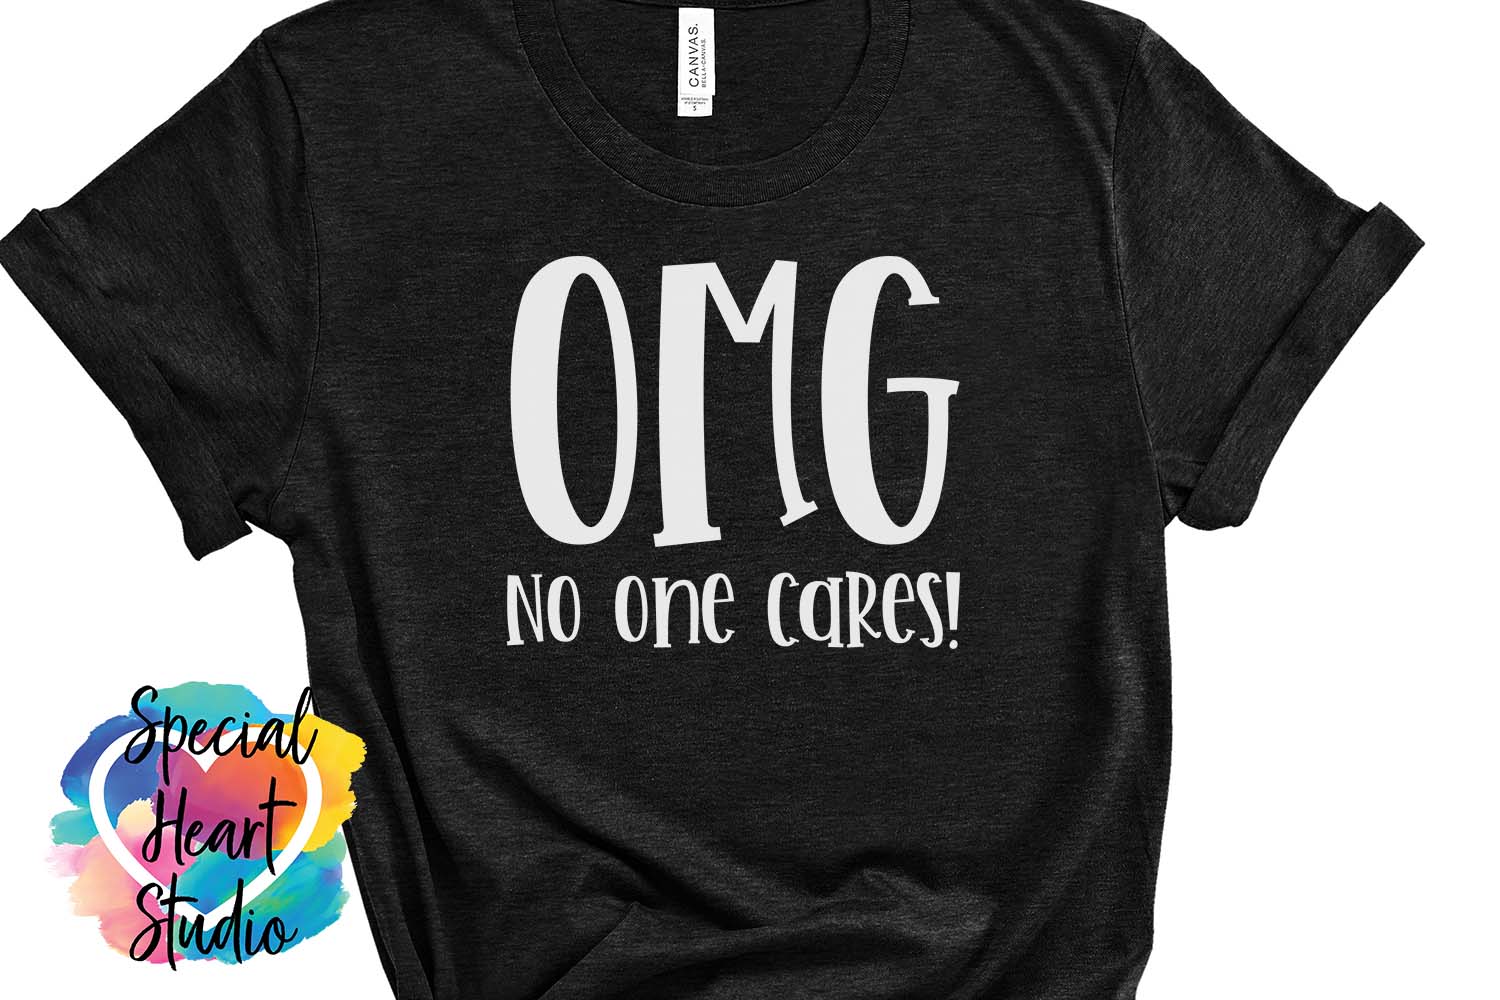 OMG No one cares - Special Heart Studio - Cut files, Crafts and Fun